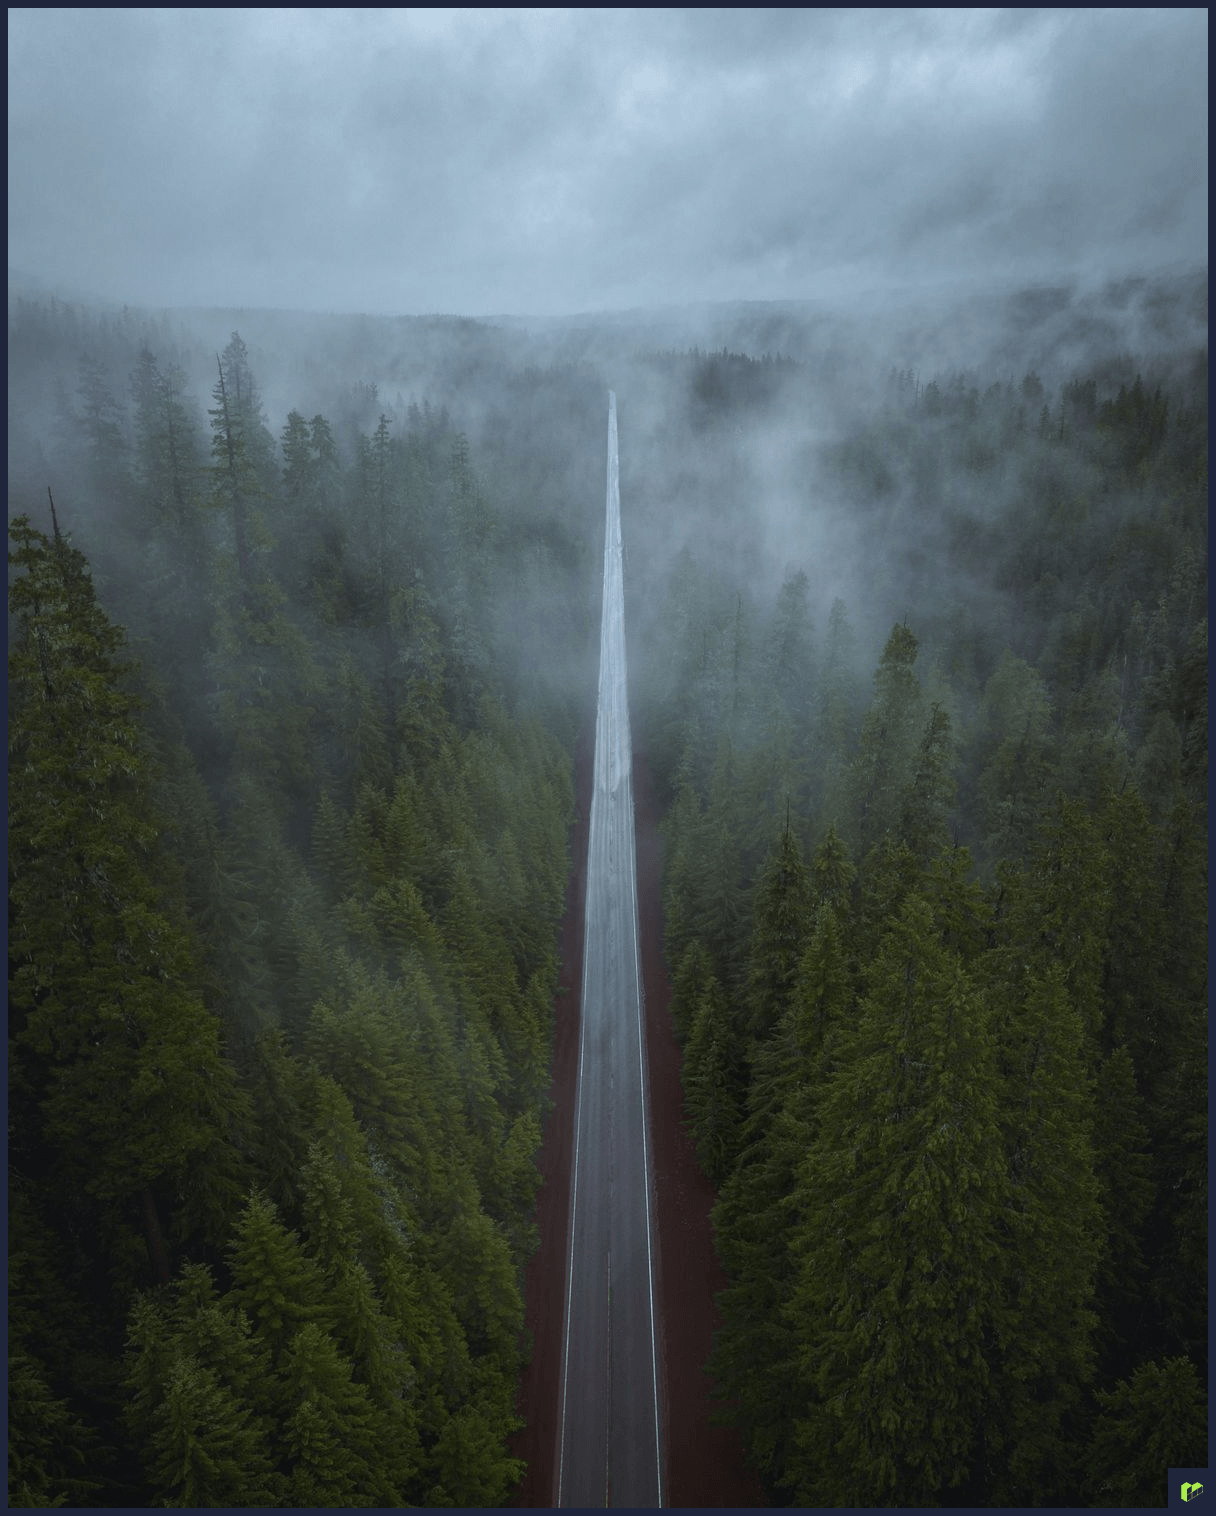 "Green World #99 - Long Road" by Chad Torkelsen